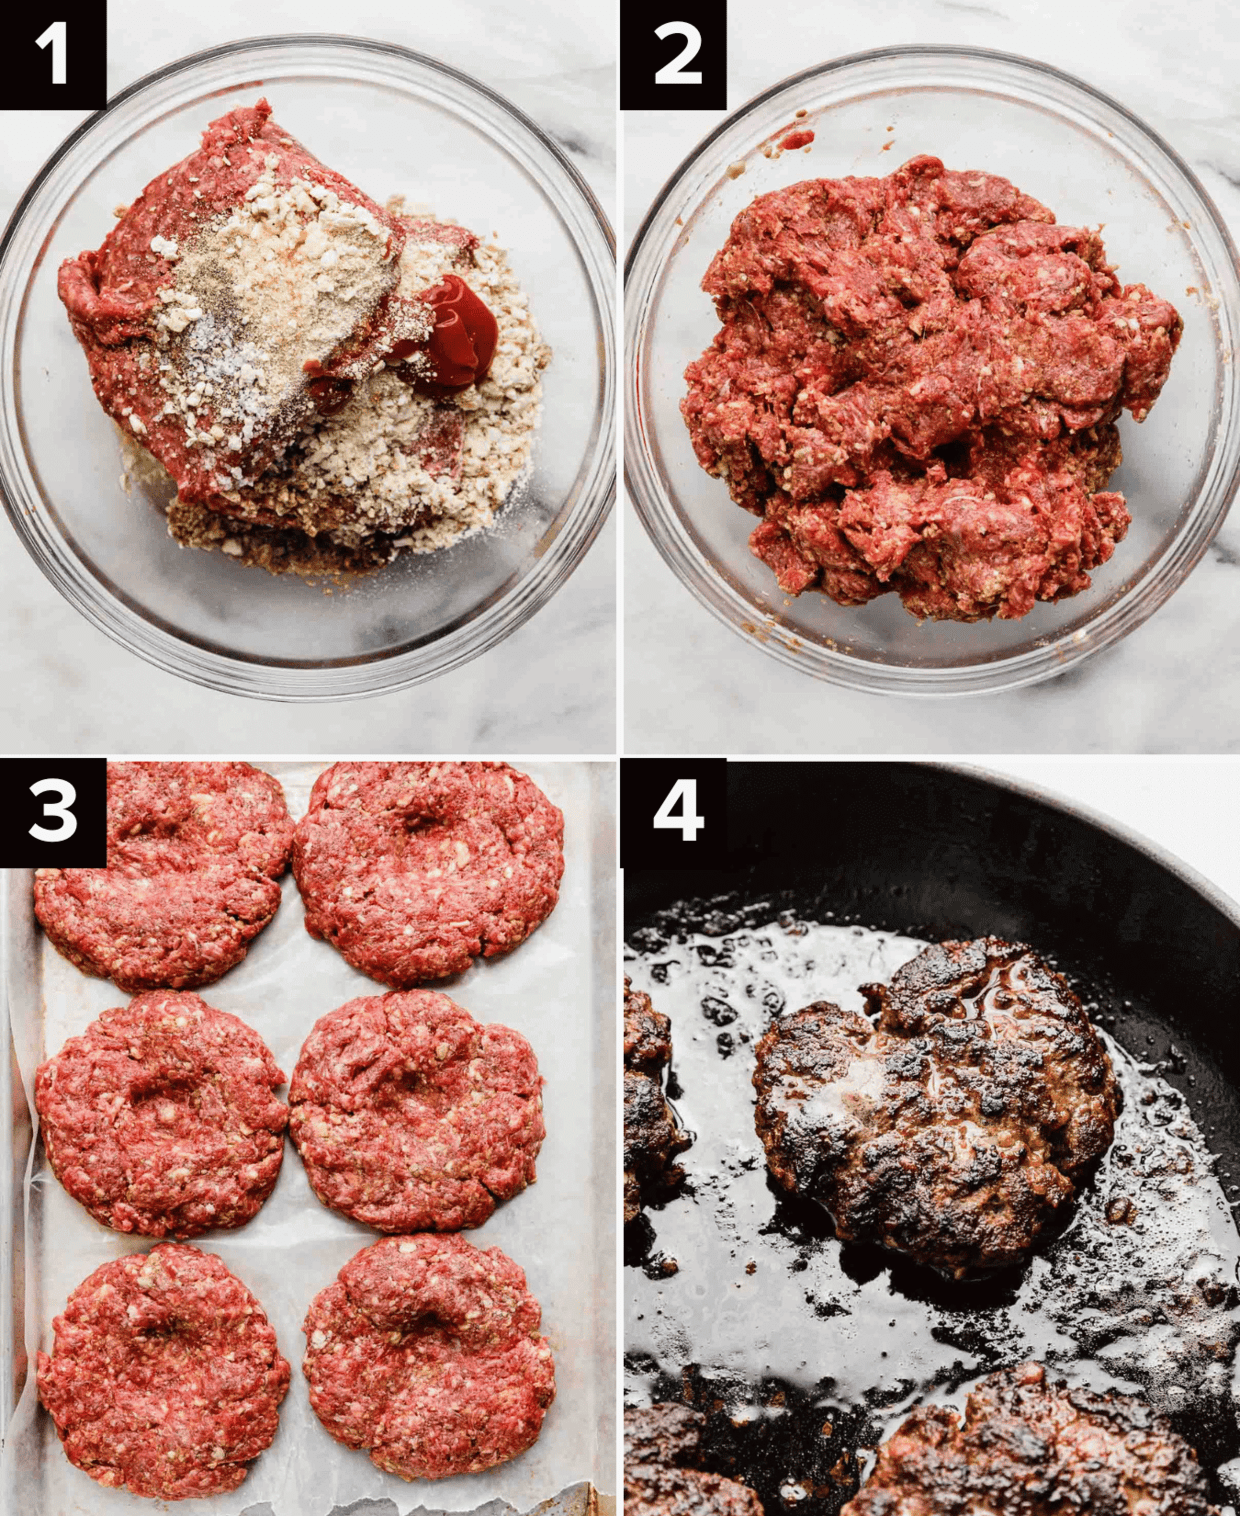 Four images showing how to make Steakhouse Burgers, top left is ground beef with seasonings, top right image is everything combined, bottom left is 6 raw steakhouse burger patties on a baking sheet, bottom right is a Steakhouse Burger cooking on a skillet.